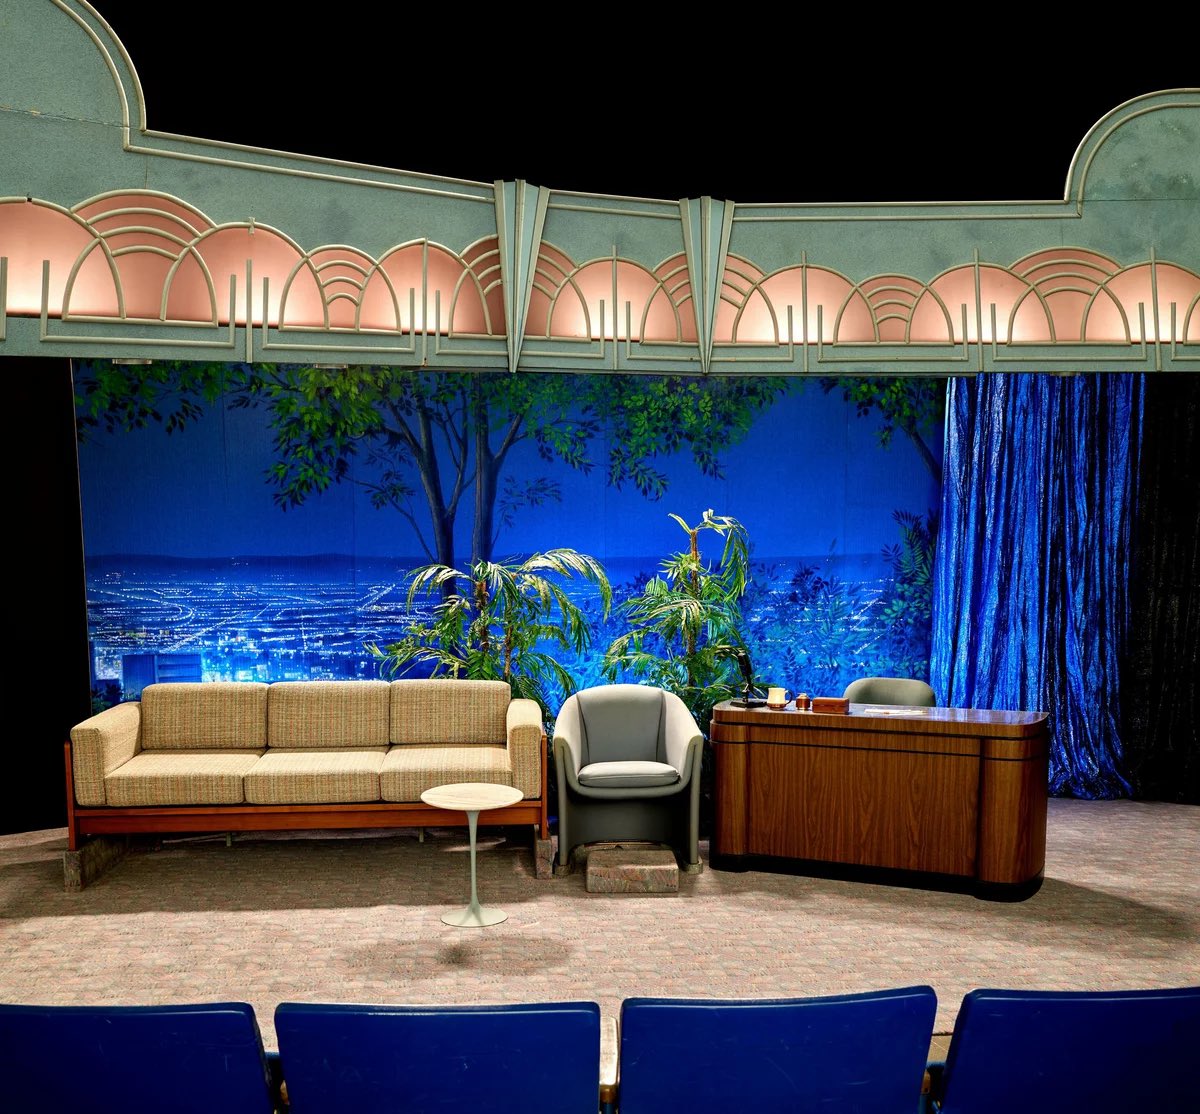 Johnny Carson's original TONIGHT SHOW set just sold for $287,000 via @HeritageAuction 😲